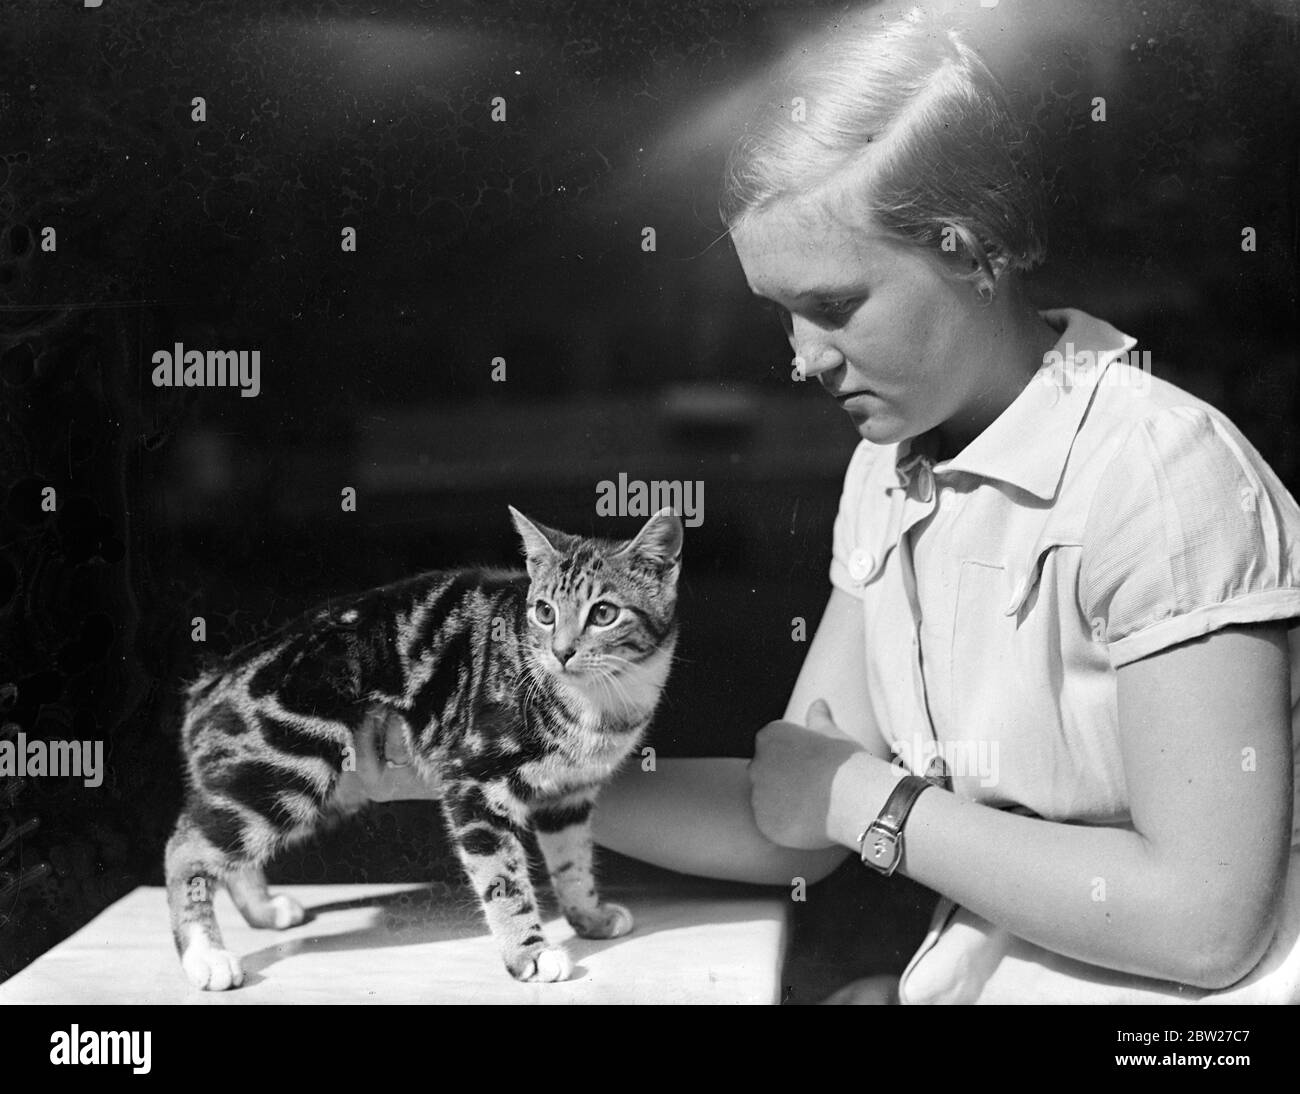 Miss Sibyl Rollo with a seven month old Silver Tabby Manx kitten who is on view at the Kensington Kitten Club's show which is in progess at Knightsbridge. 14 July 1937 Stock Photo